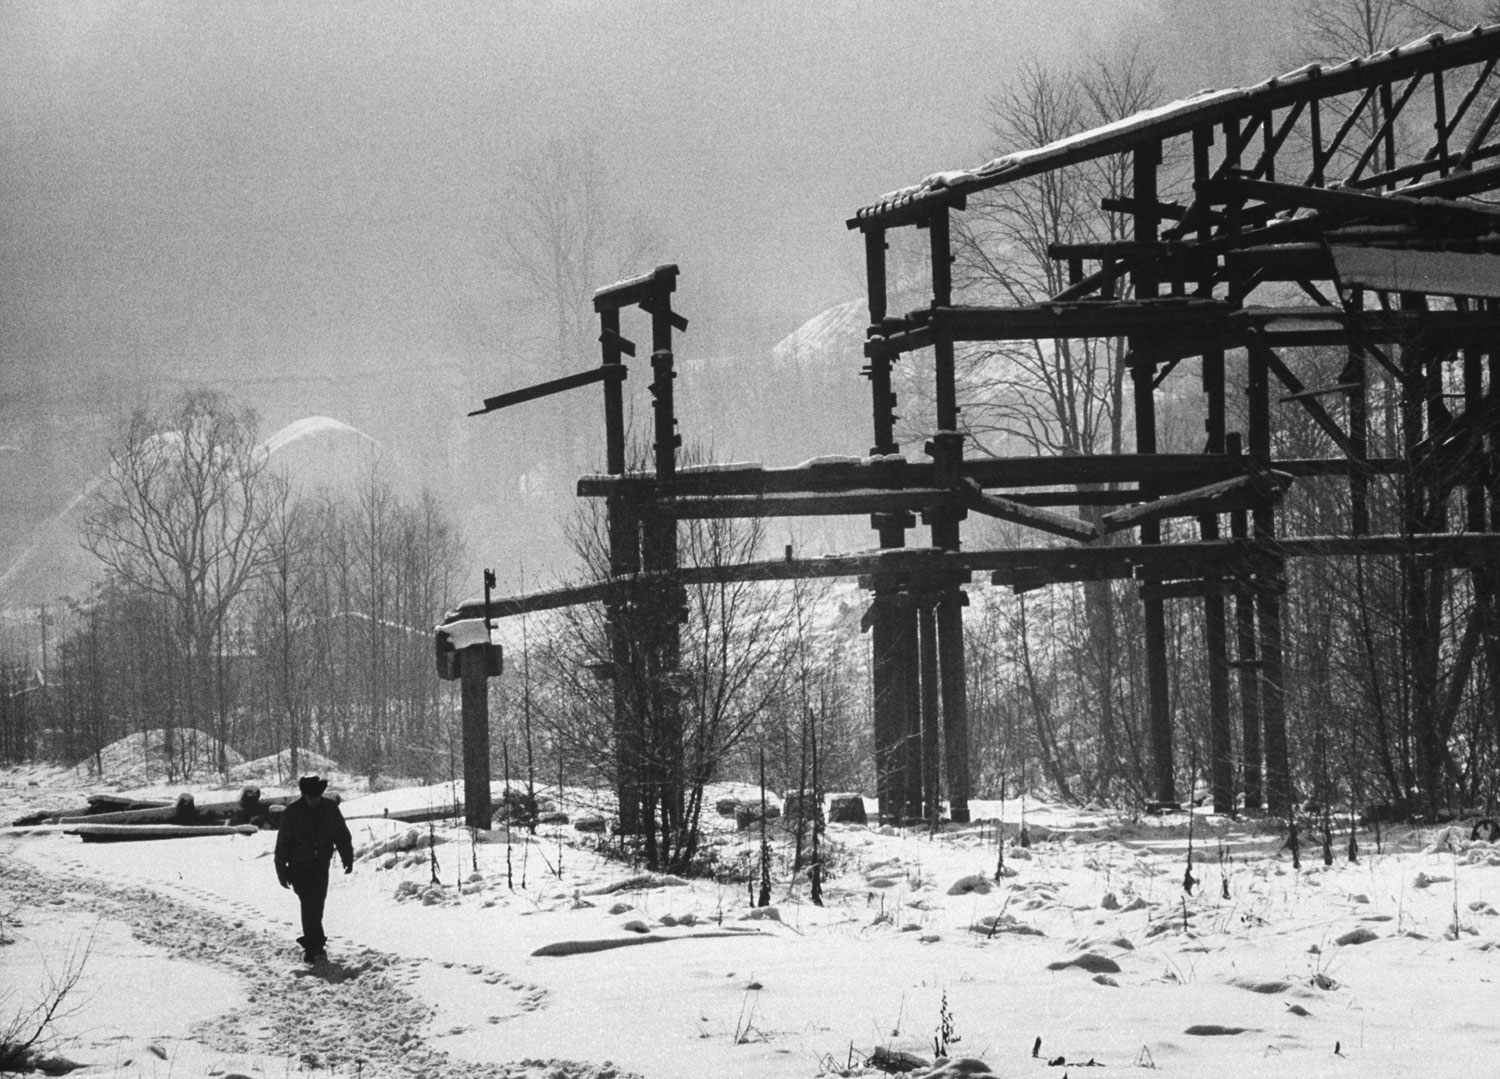 All over Appalachia the ruins of trestles jut from deserted hillside coal mines. This mine, once owned by Thornton Mining Co., was making big money 20 years ago. It paid miners $8.50 a day -- good pay in those days -- and wealth flowed through the valley. The mine closed in 1945.